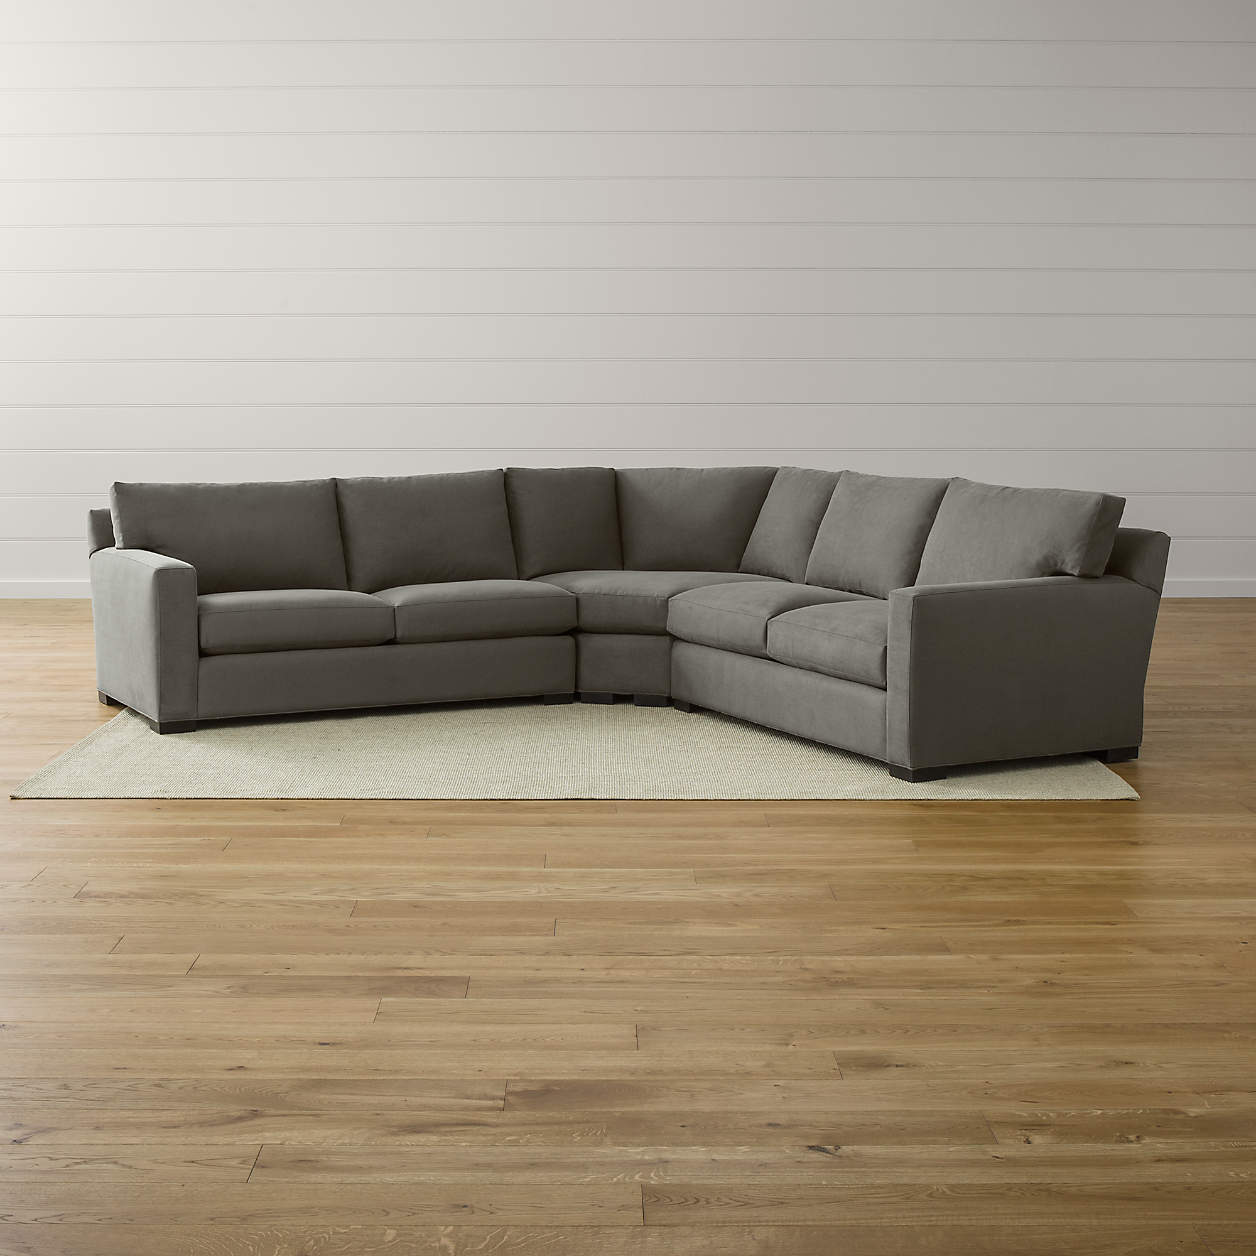 Axis II Charcoal Sectional Couch + Reviews | Crate and Barrel